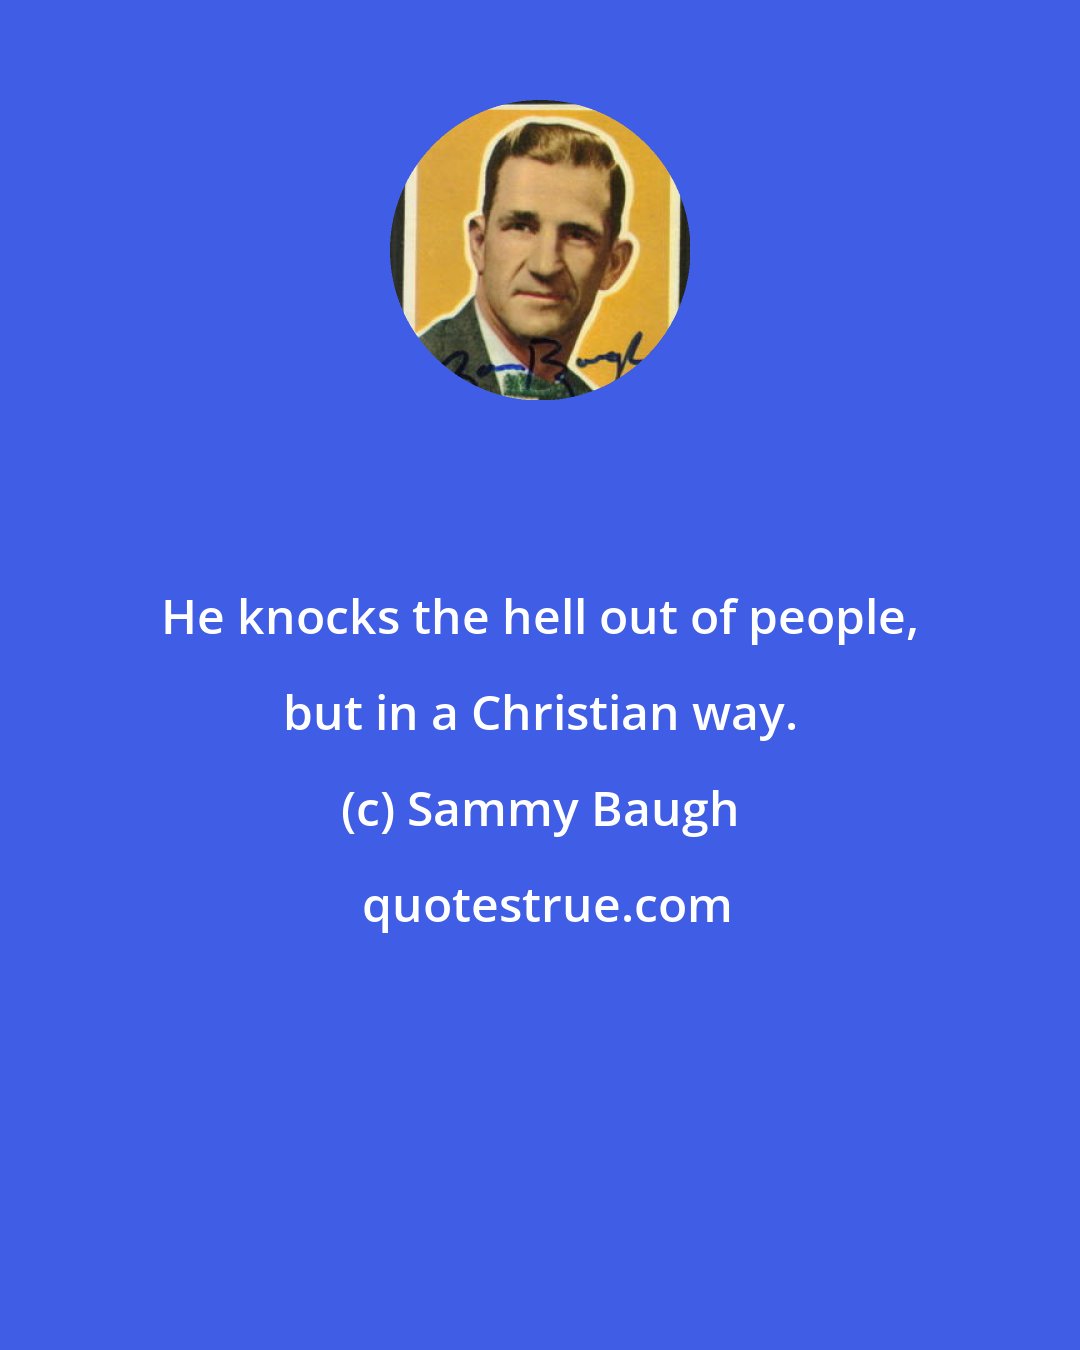 Sammy Baugh: He knocks the hell out of people, but in a Christian way.